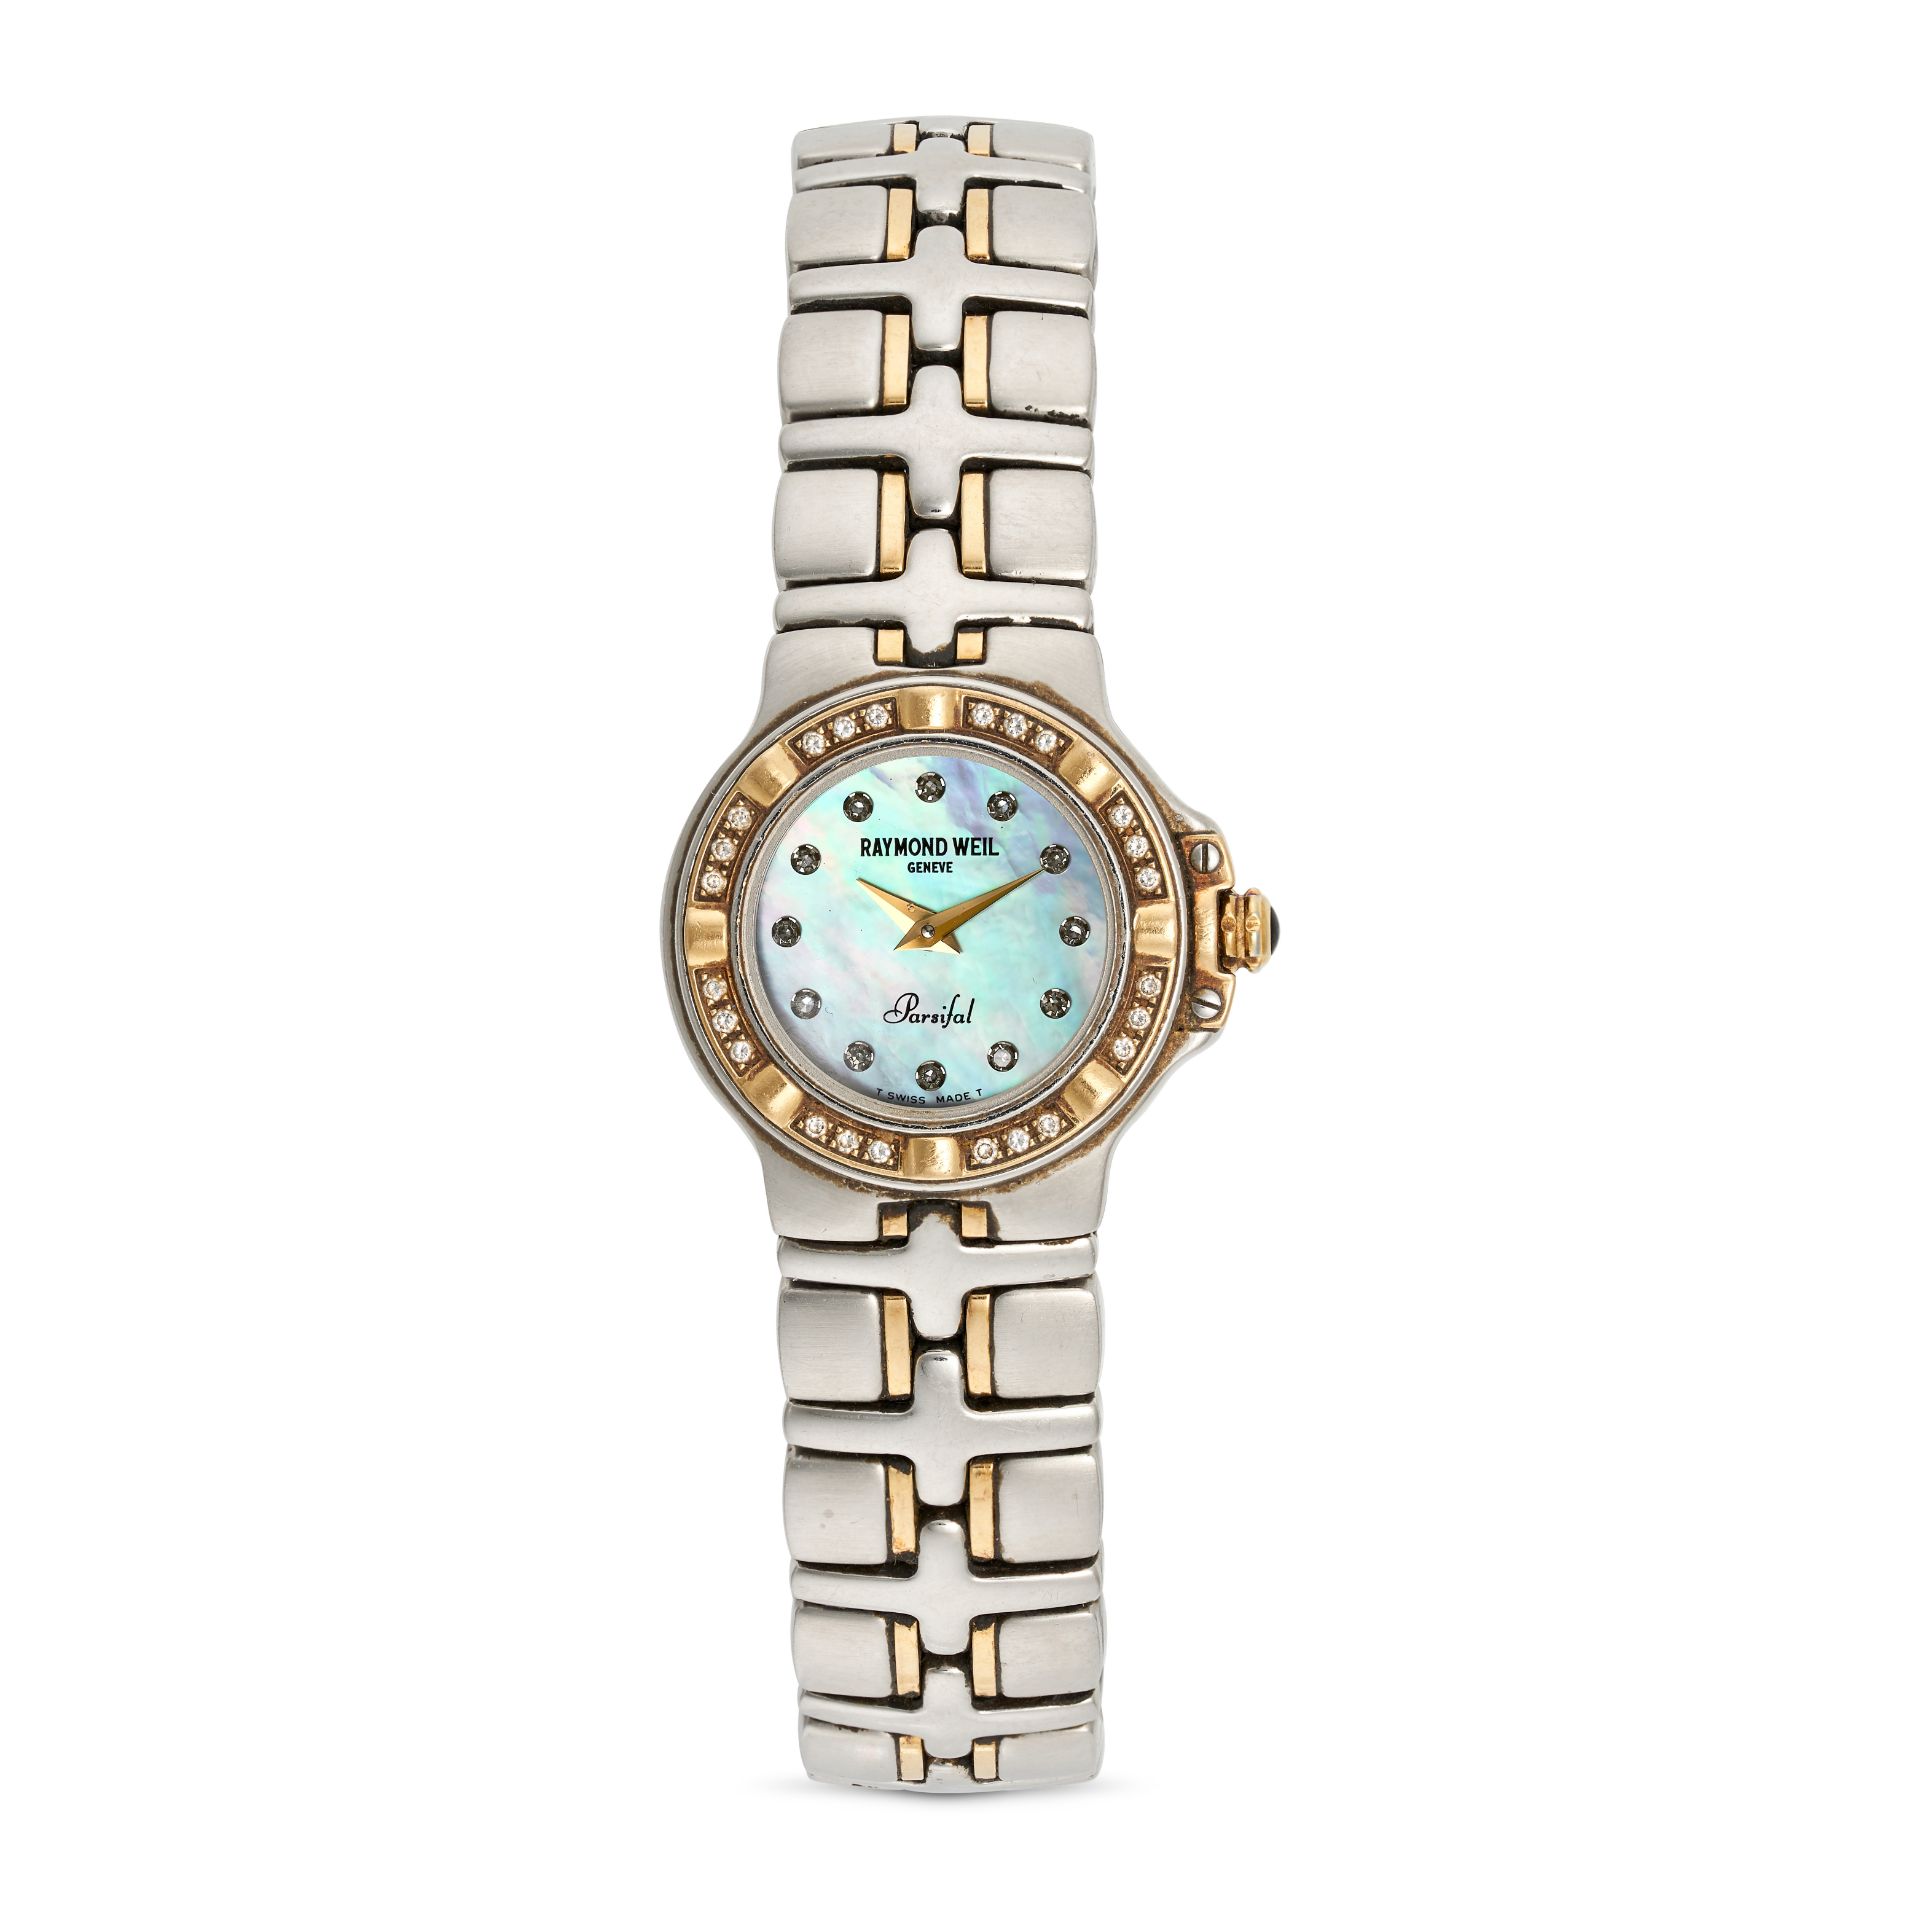 RAYMOND WEIL, A DIAMOND AND MOTHER OF PEARL PARSIFAL WRISTWATCH in stainless steel, mother of pea...